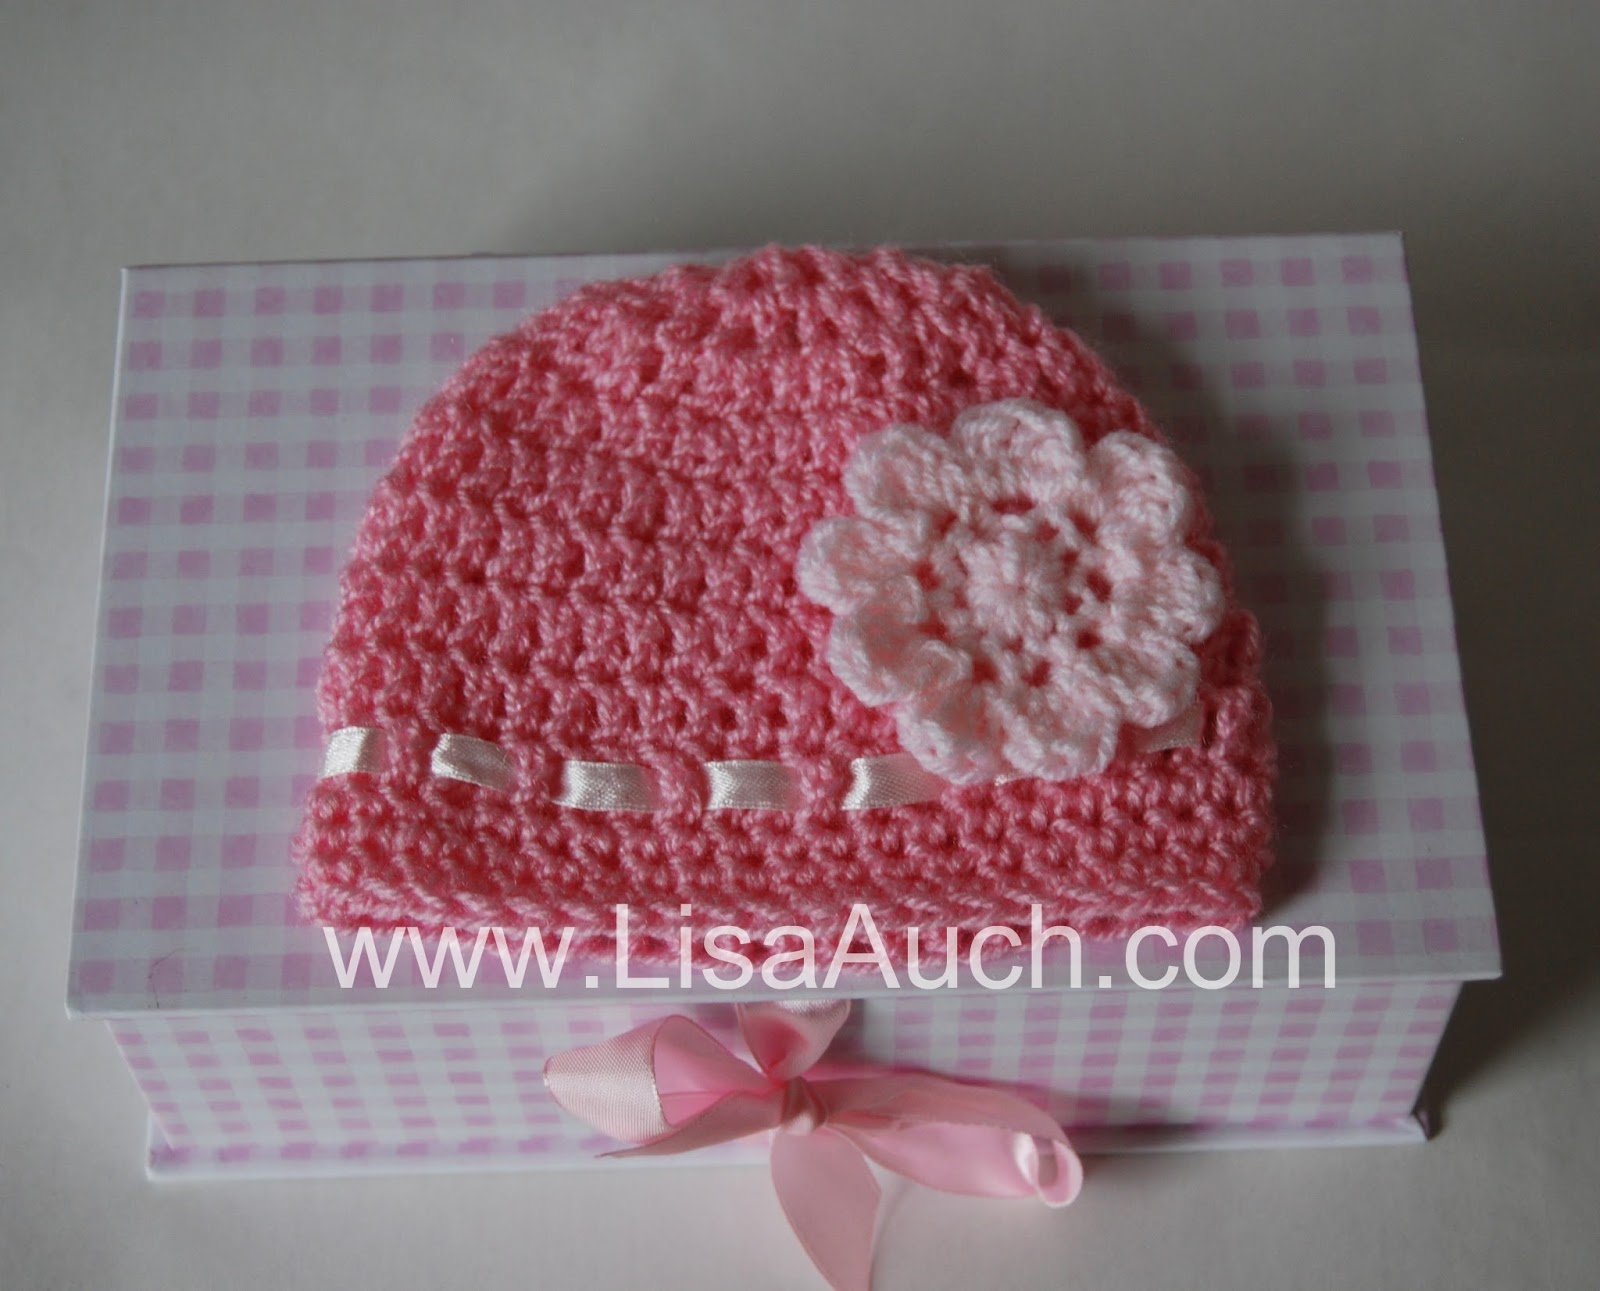 Crochet Beanie Pattern For 2 Year Old Free Crochet Patterns And Designs Lisaauch Double Crochet Ba